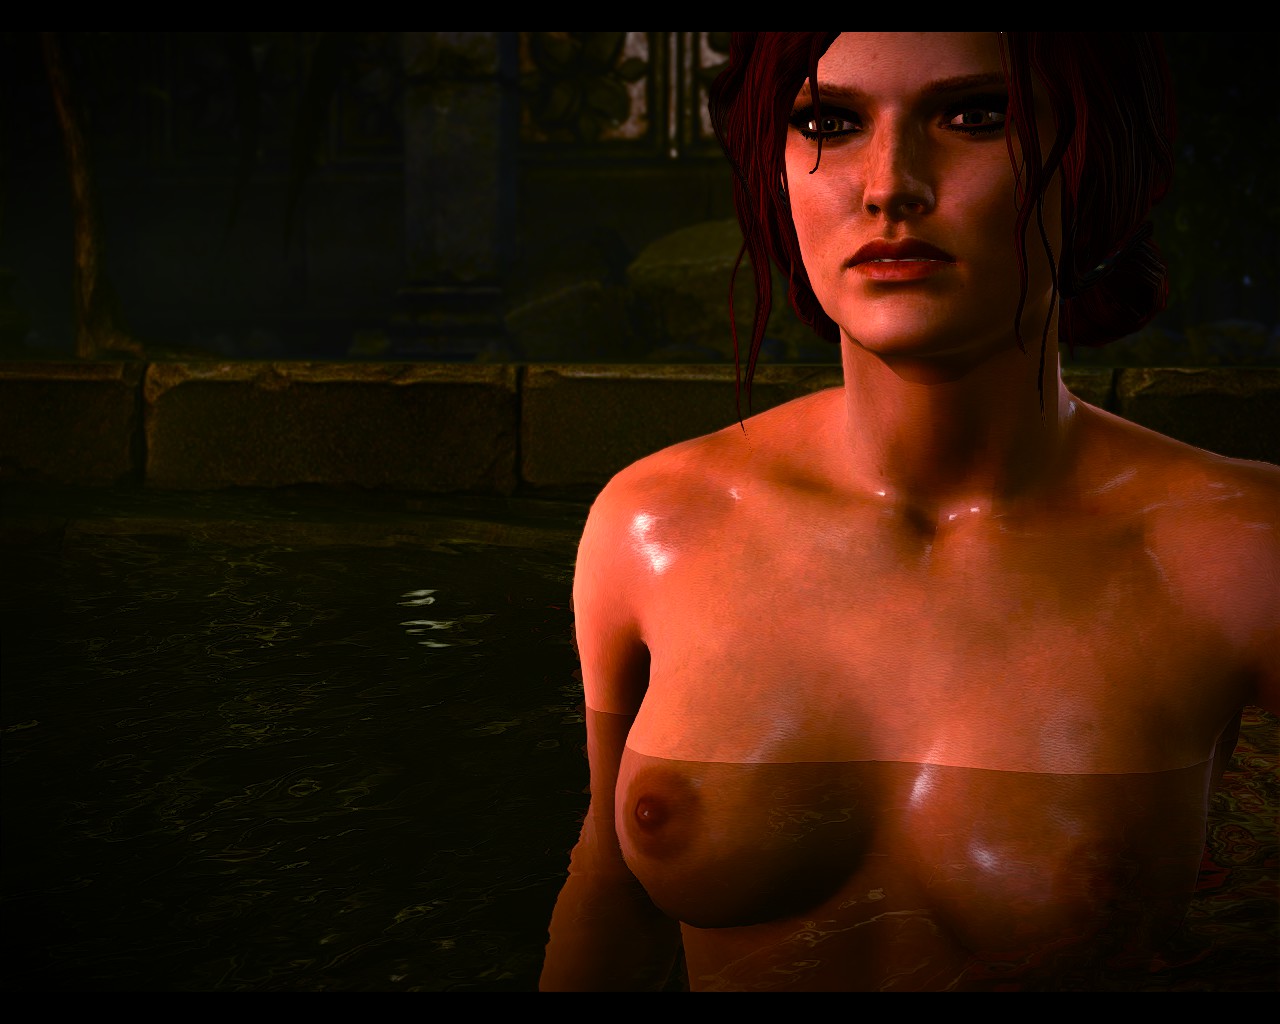 Pics showing for free -Witcher 2 triss merigold nude. nude triss merigold.....